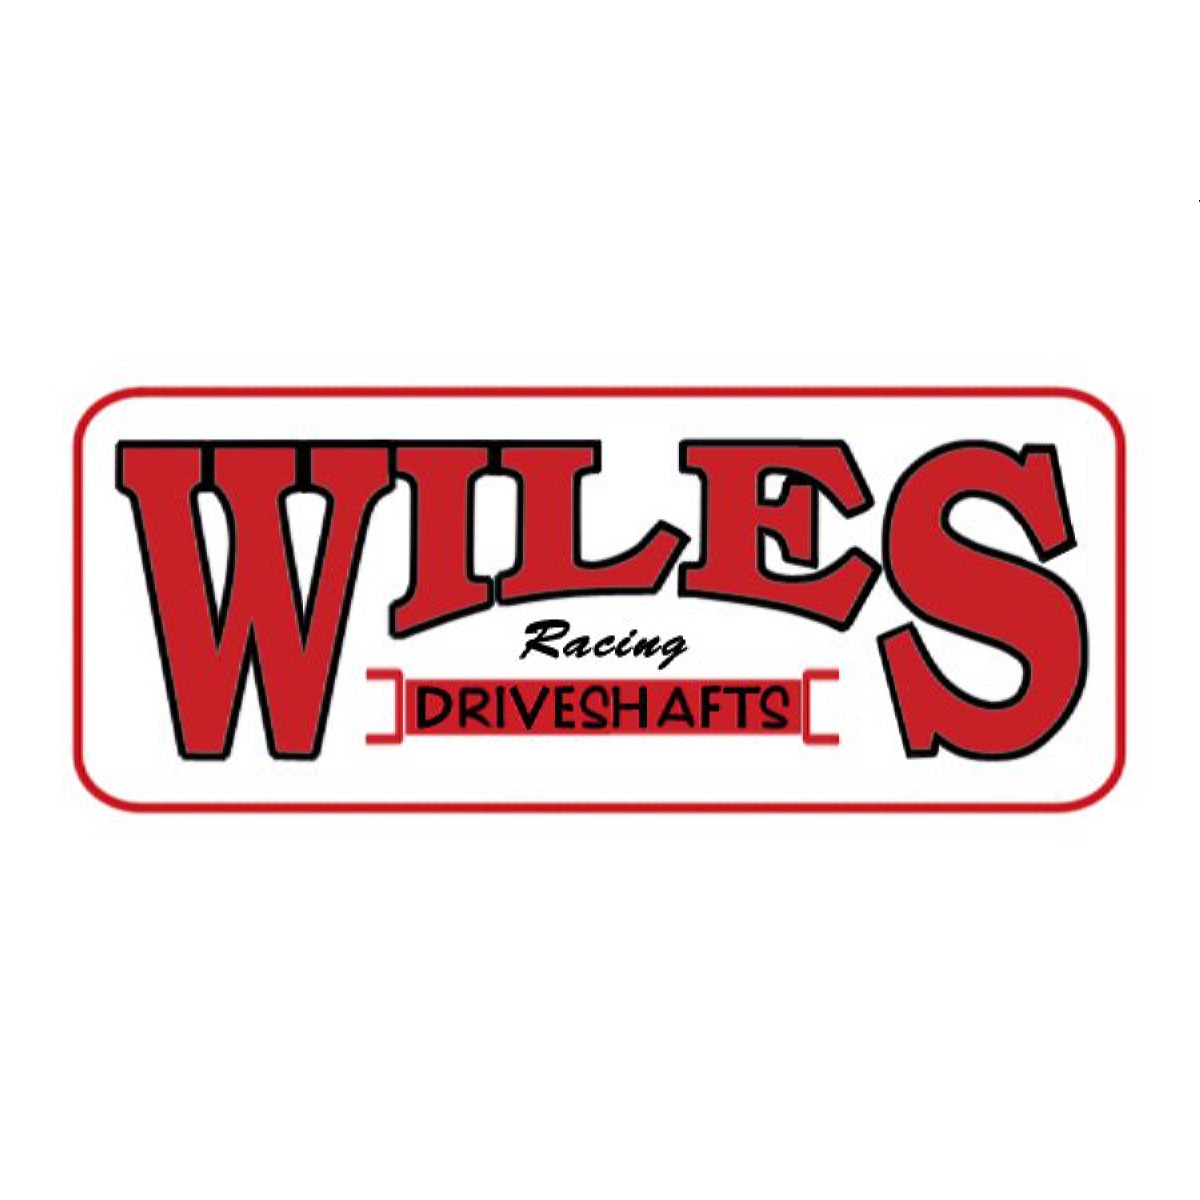 Wiles Driveshafts